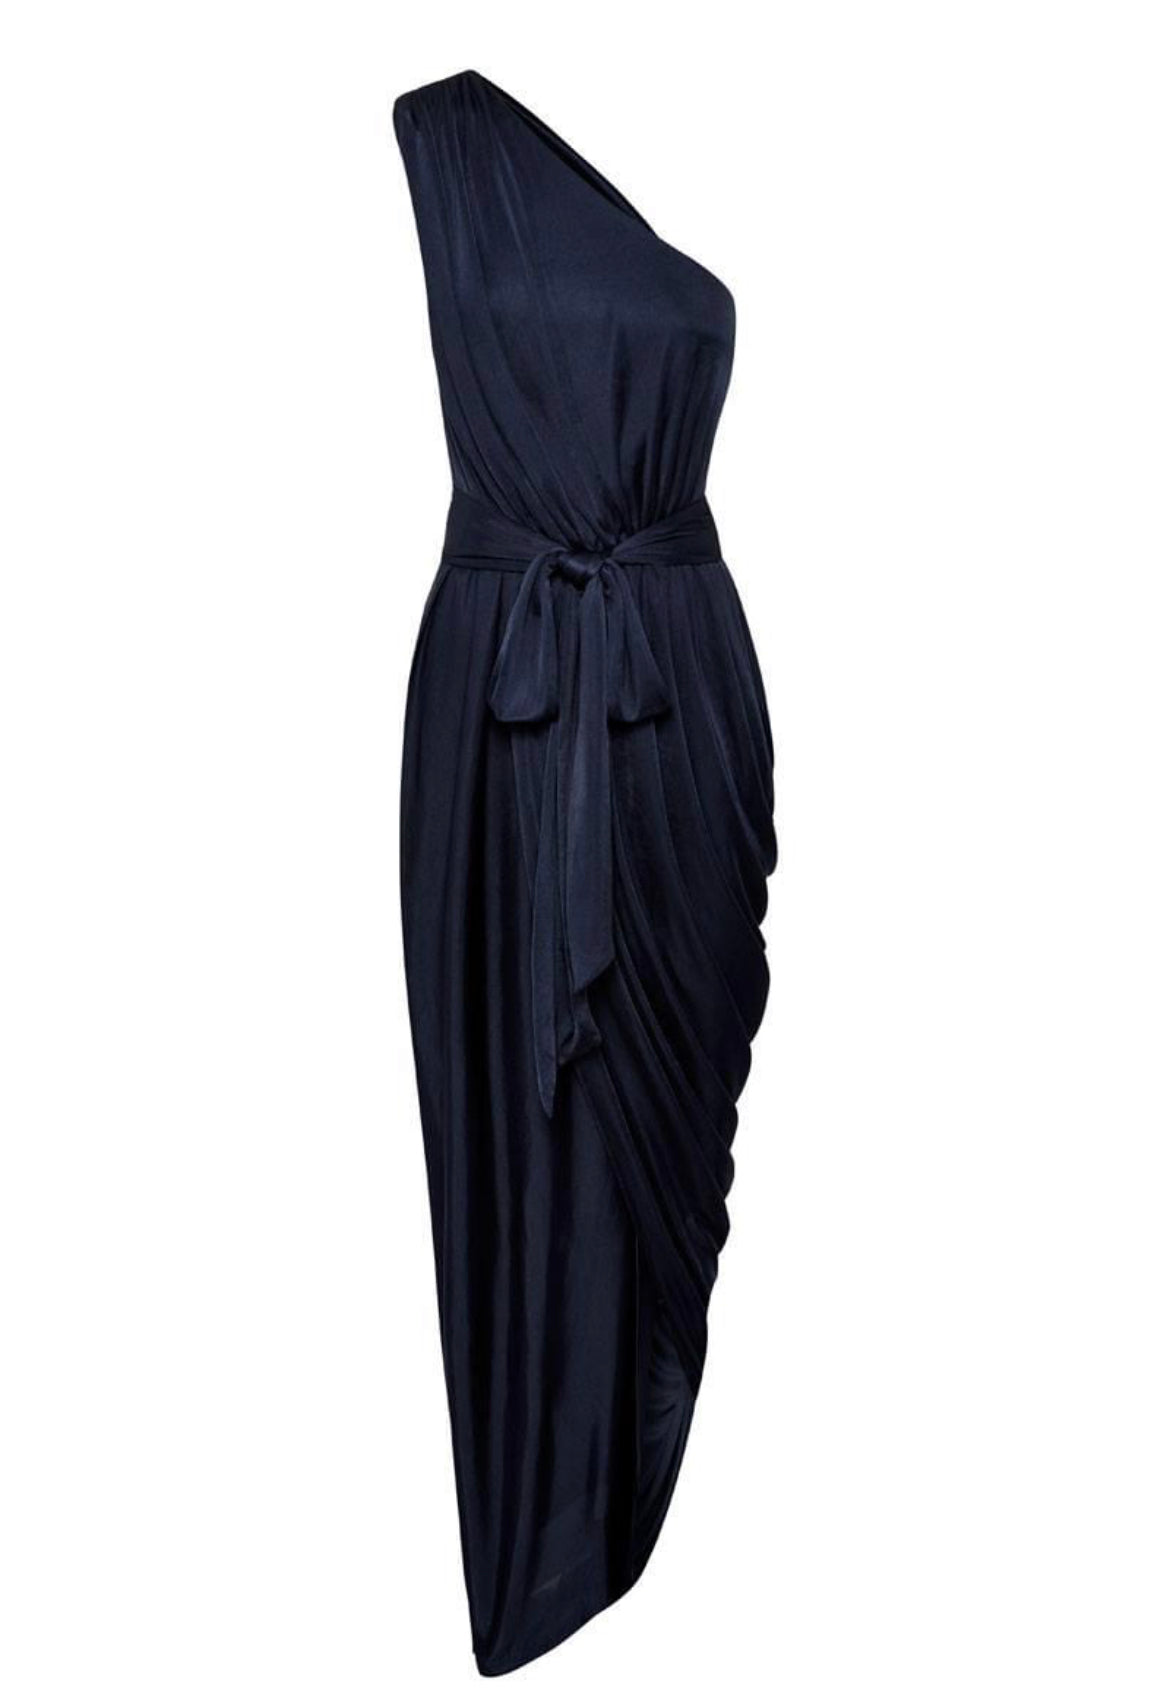 Sheike navy blue cocktail dress. one shoulder, draping material with leg split and waist tie